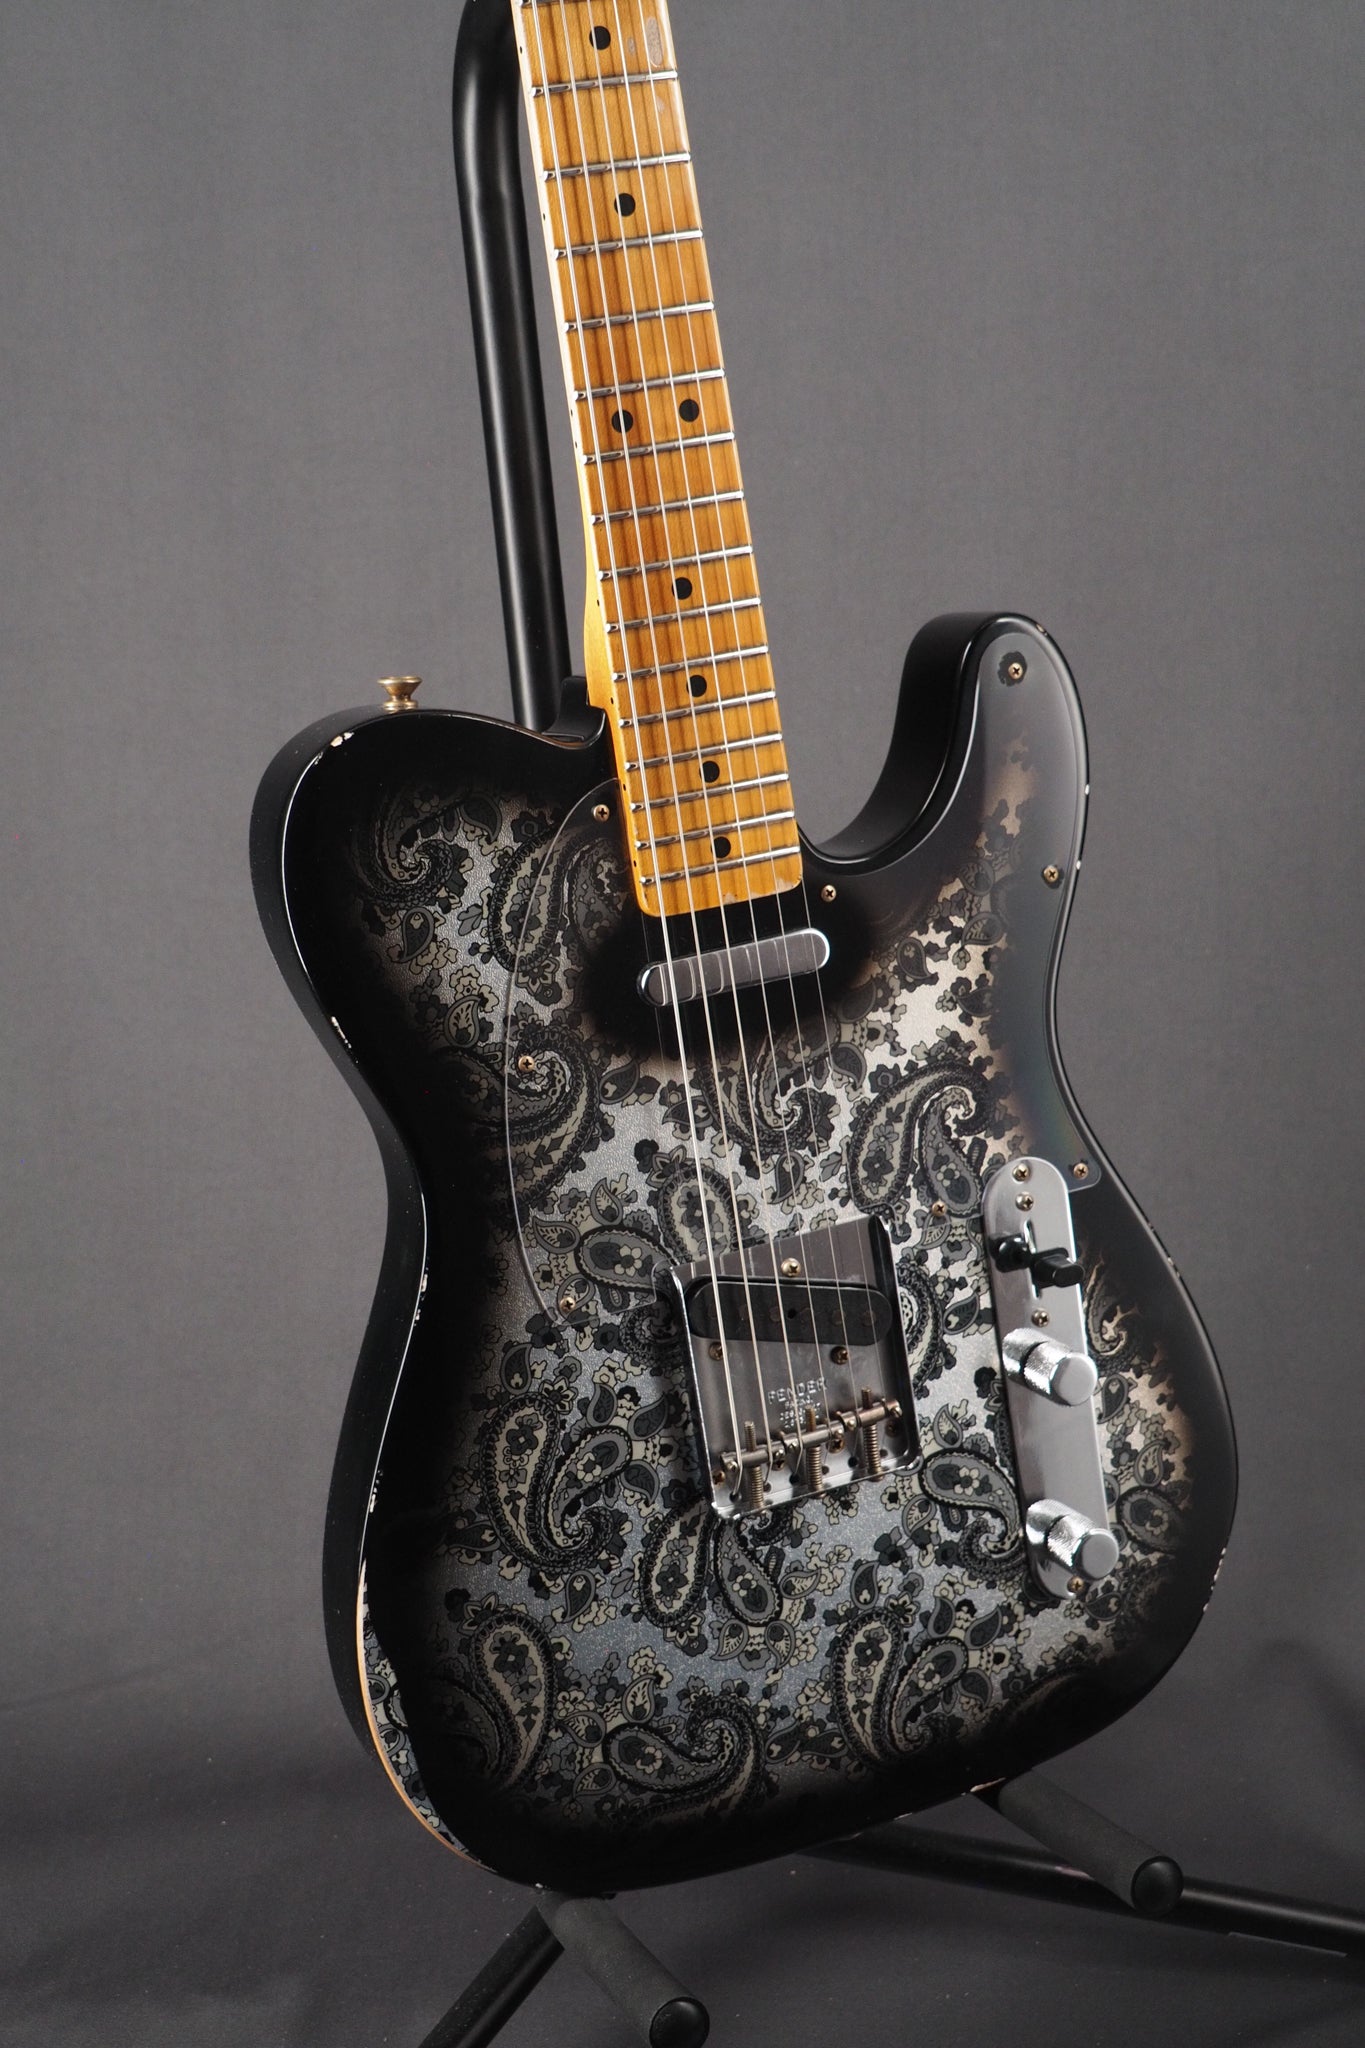 '68 Limited-Edition Telecaster Relic - Black Paisley